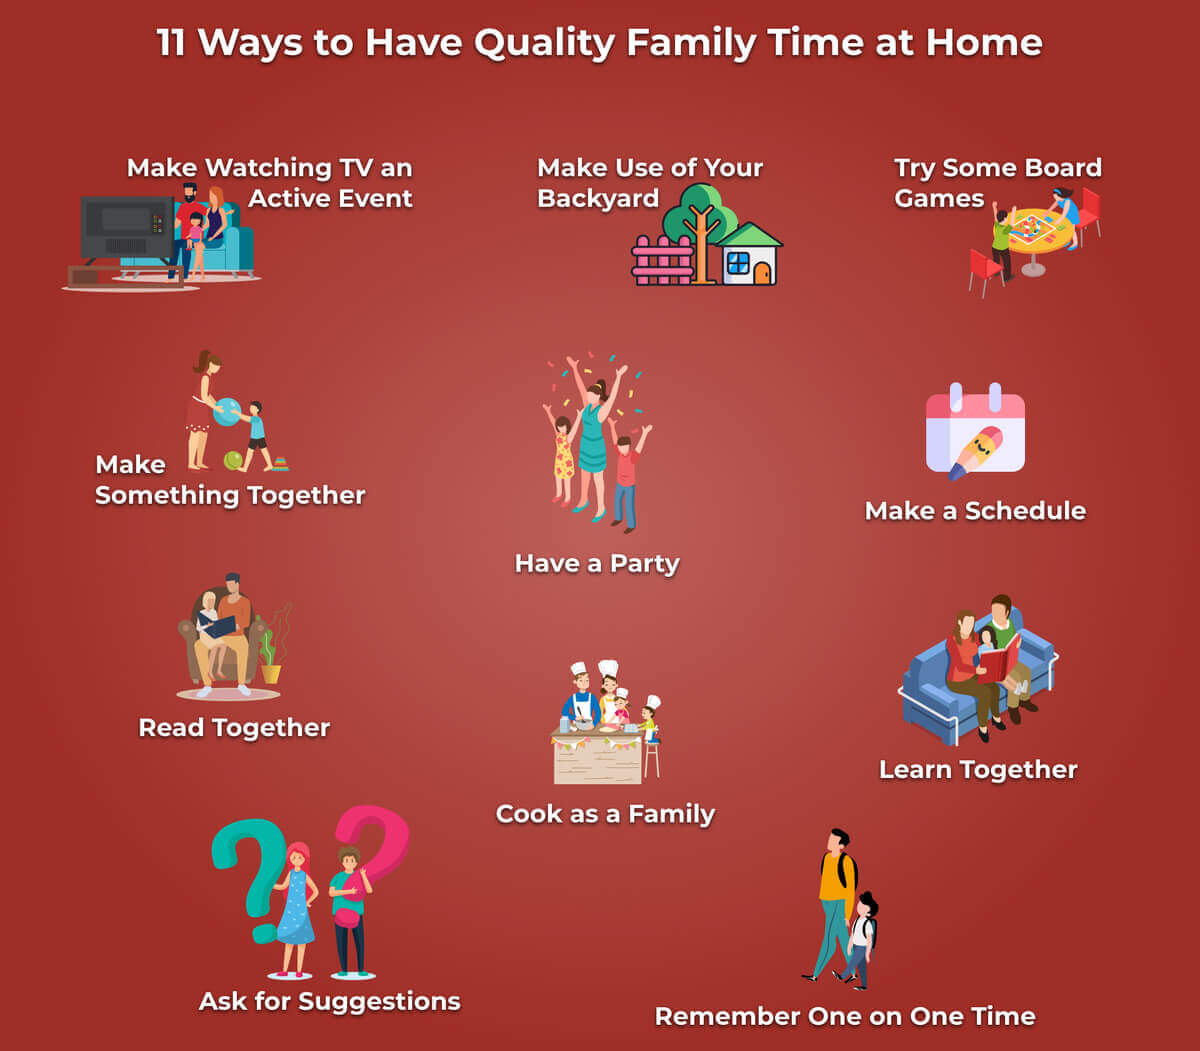 11 Ways to Have Quality Family Time at Home